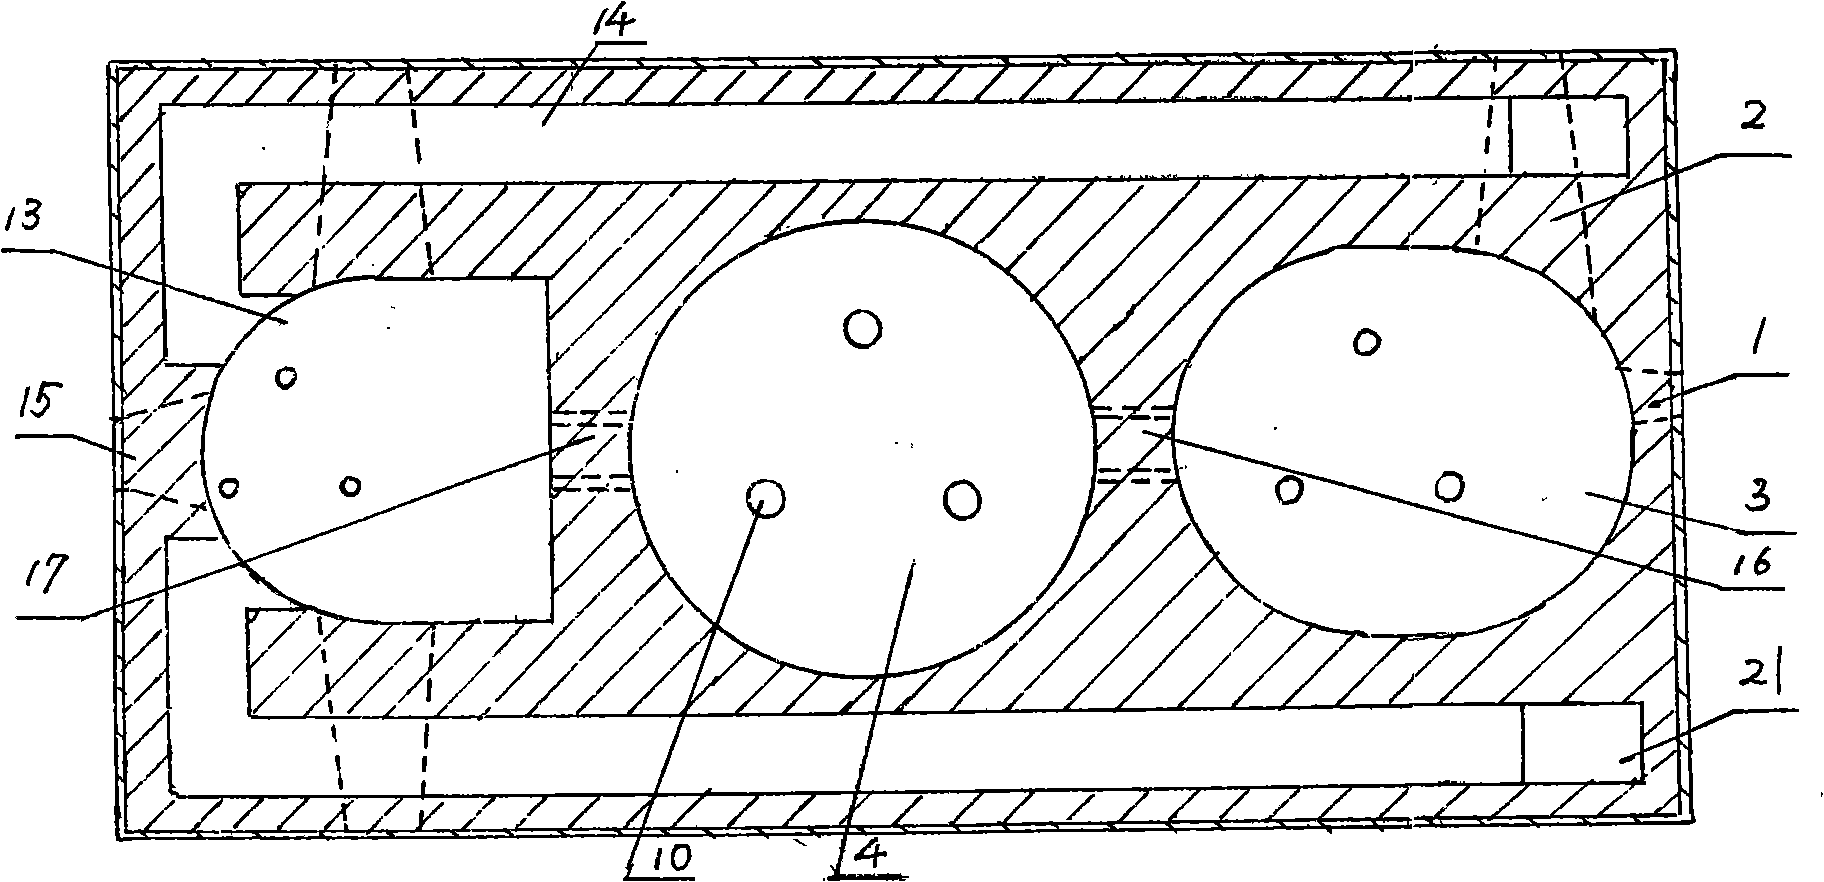 Process and apparatus for processing municipal sewage sludge by using nepheline nucleated glass